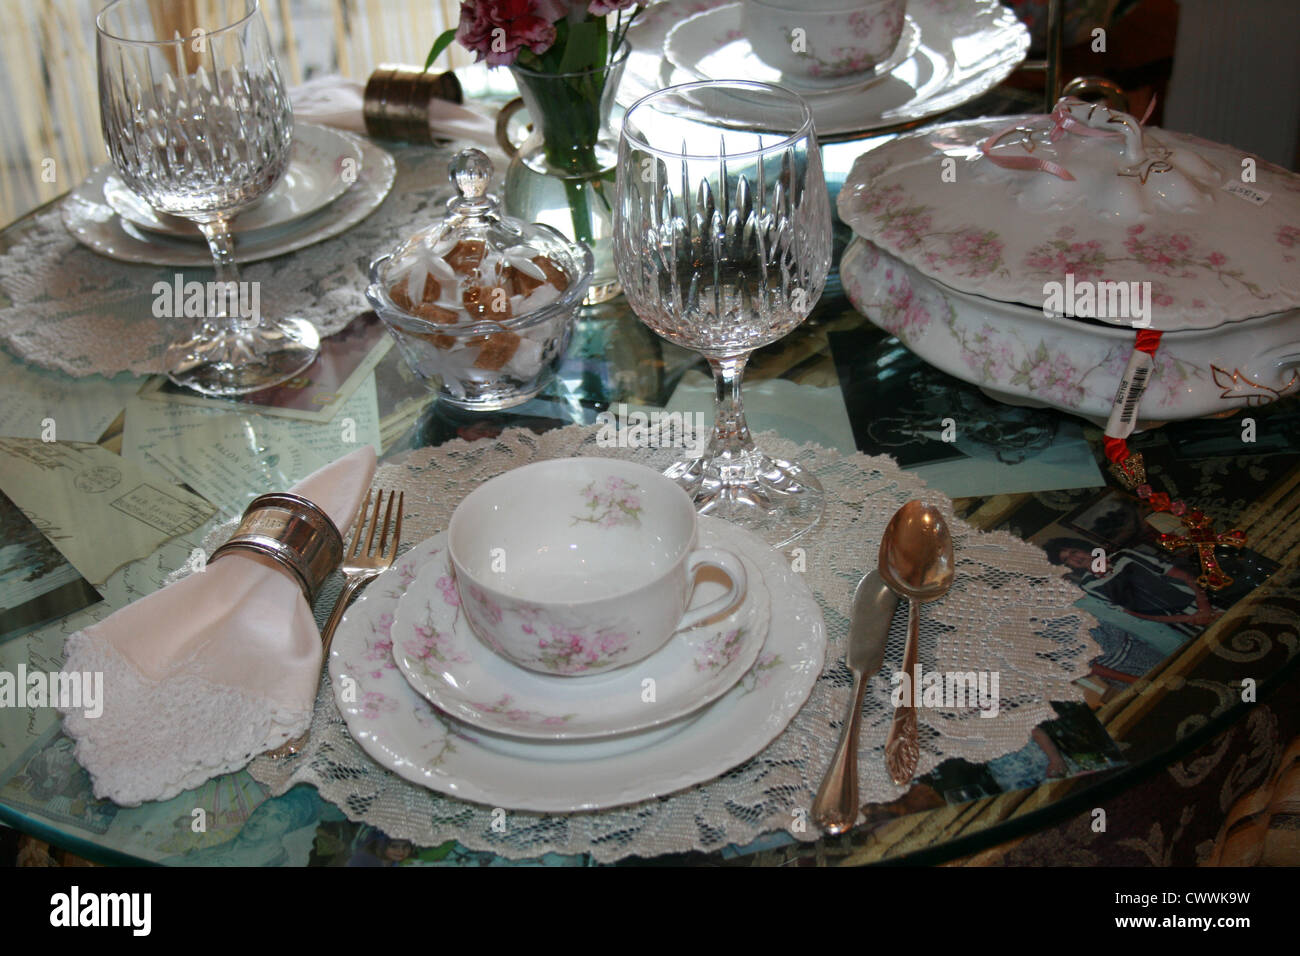 still life photo old vintage antique china dining room porcelain dinnerware set with lace and crystal wine glasses silverware Stock Photo